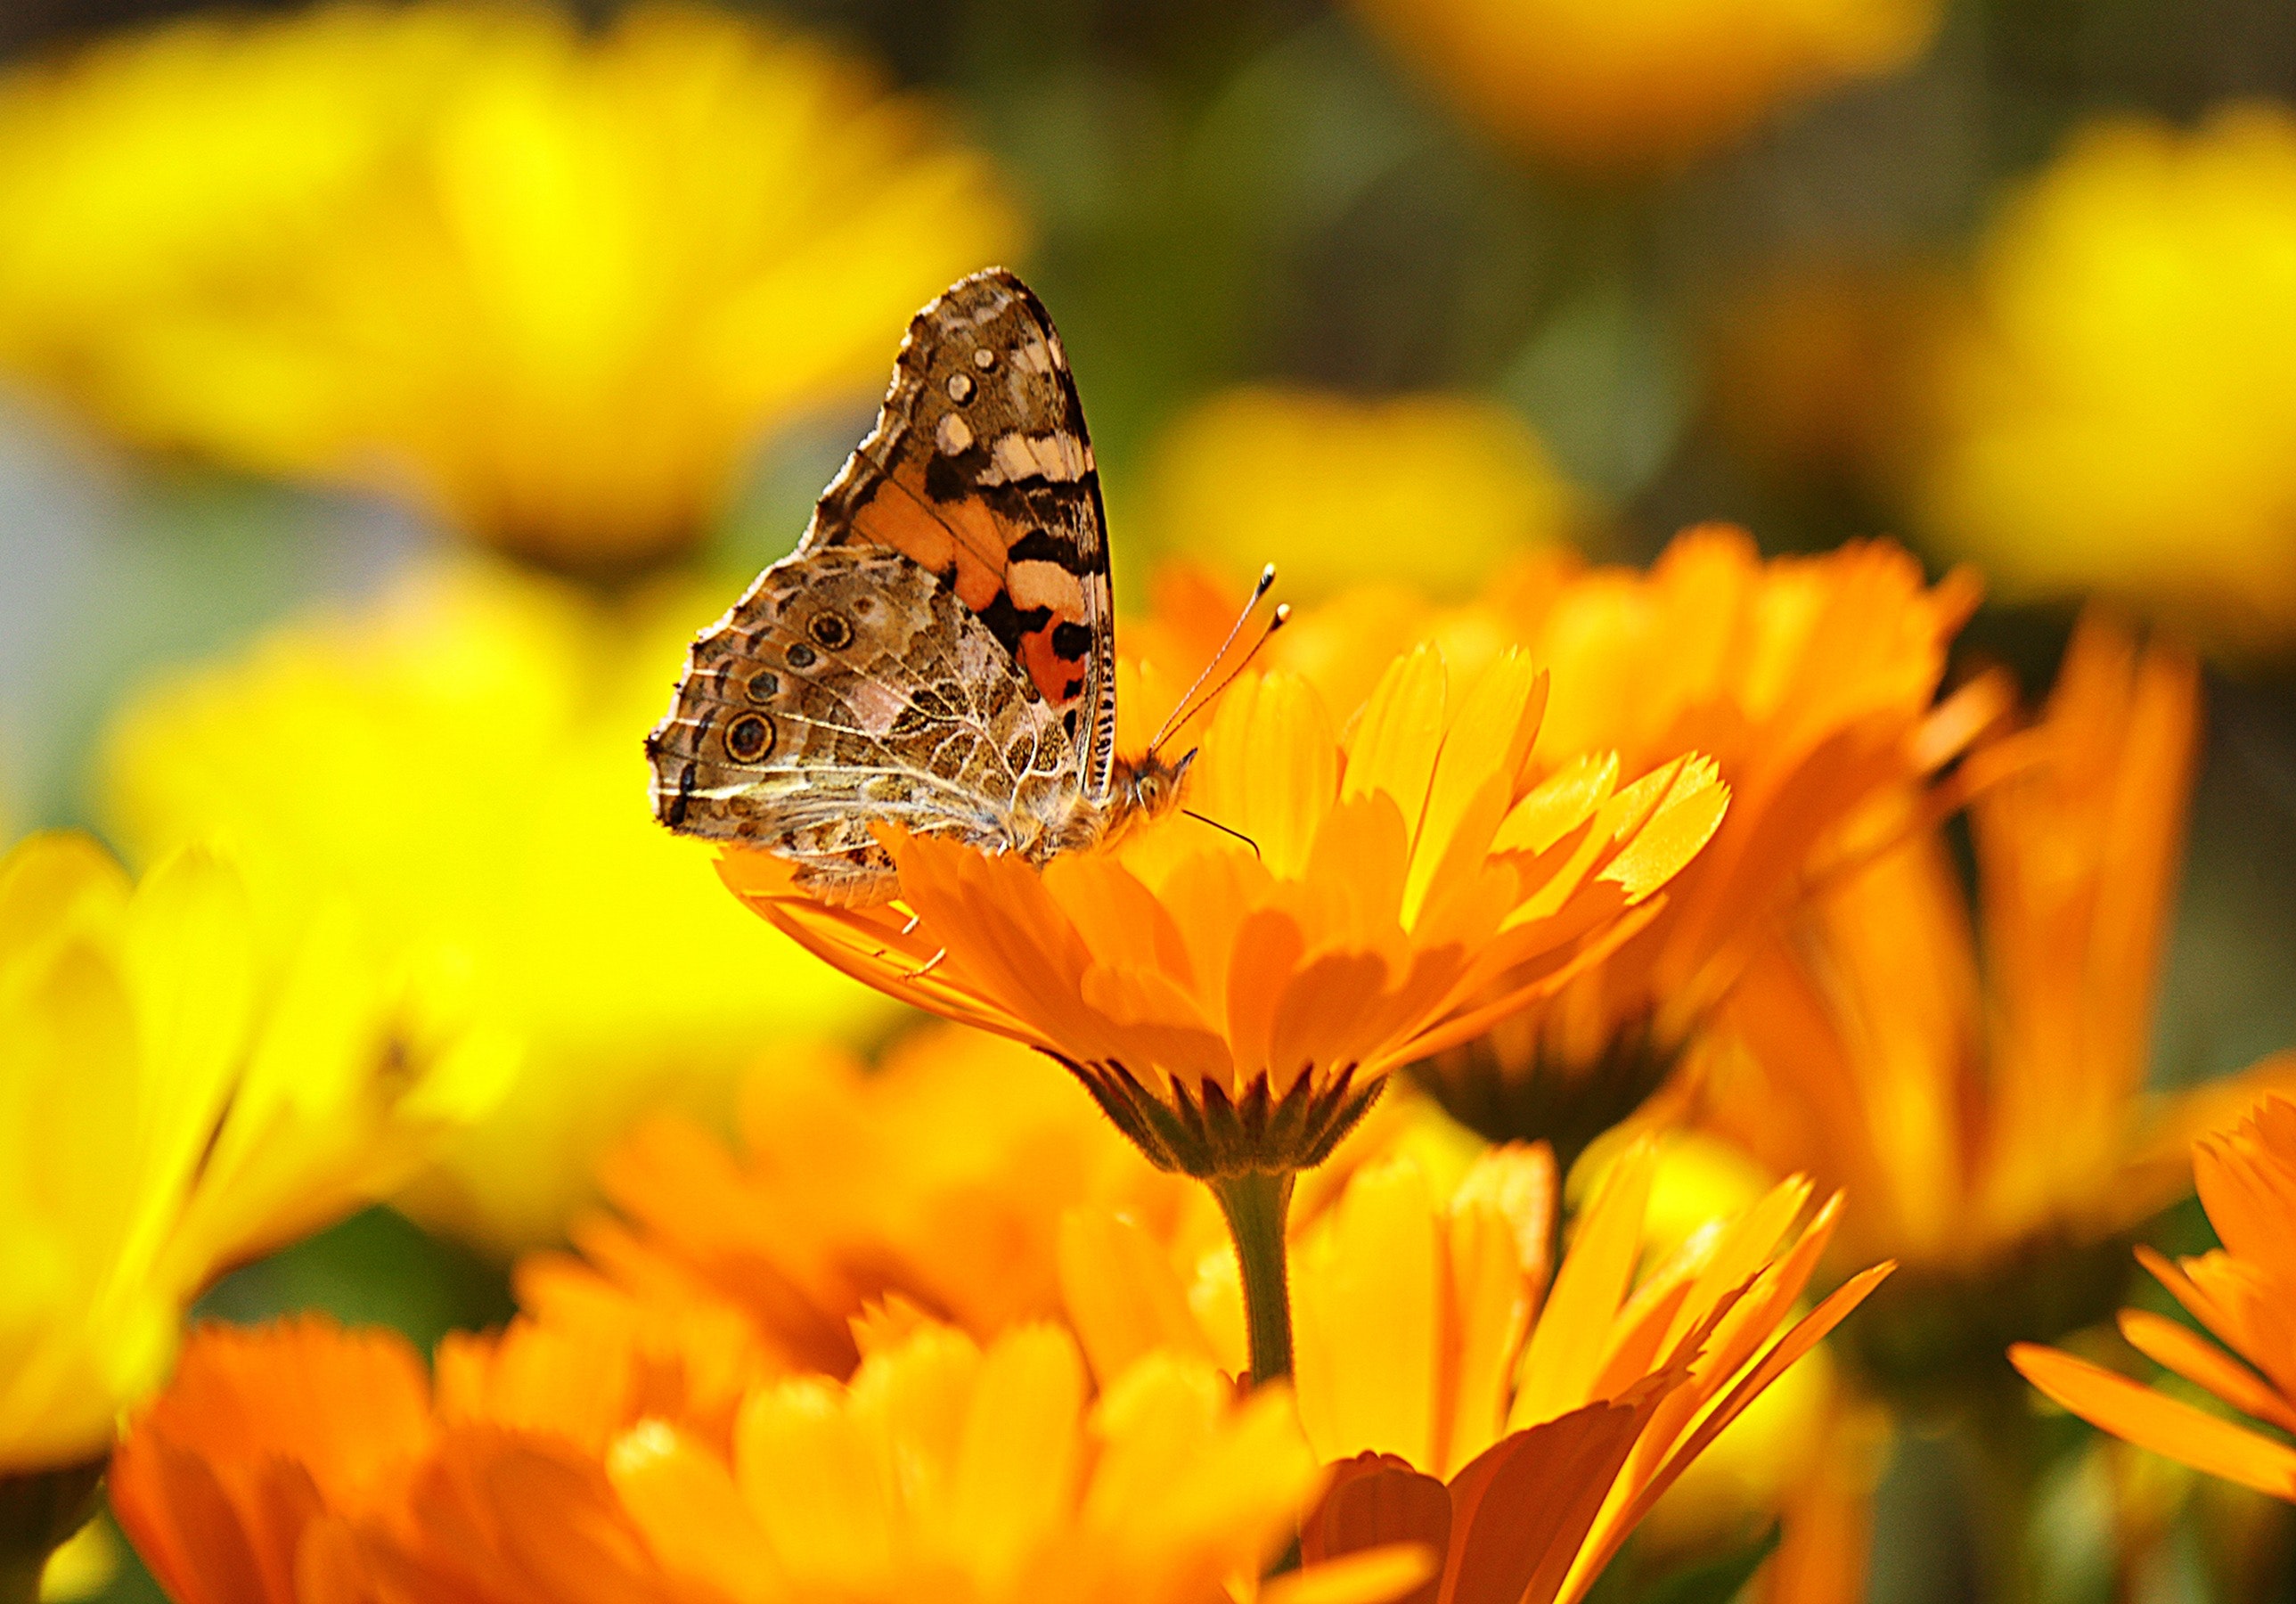 Butterfly perched on the yellow petaled flower during daytime photo